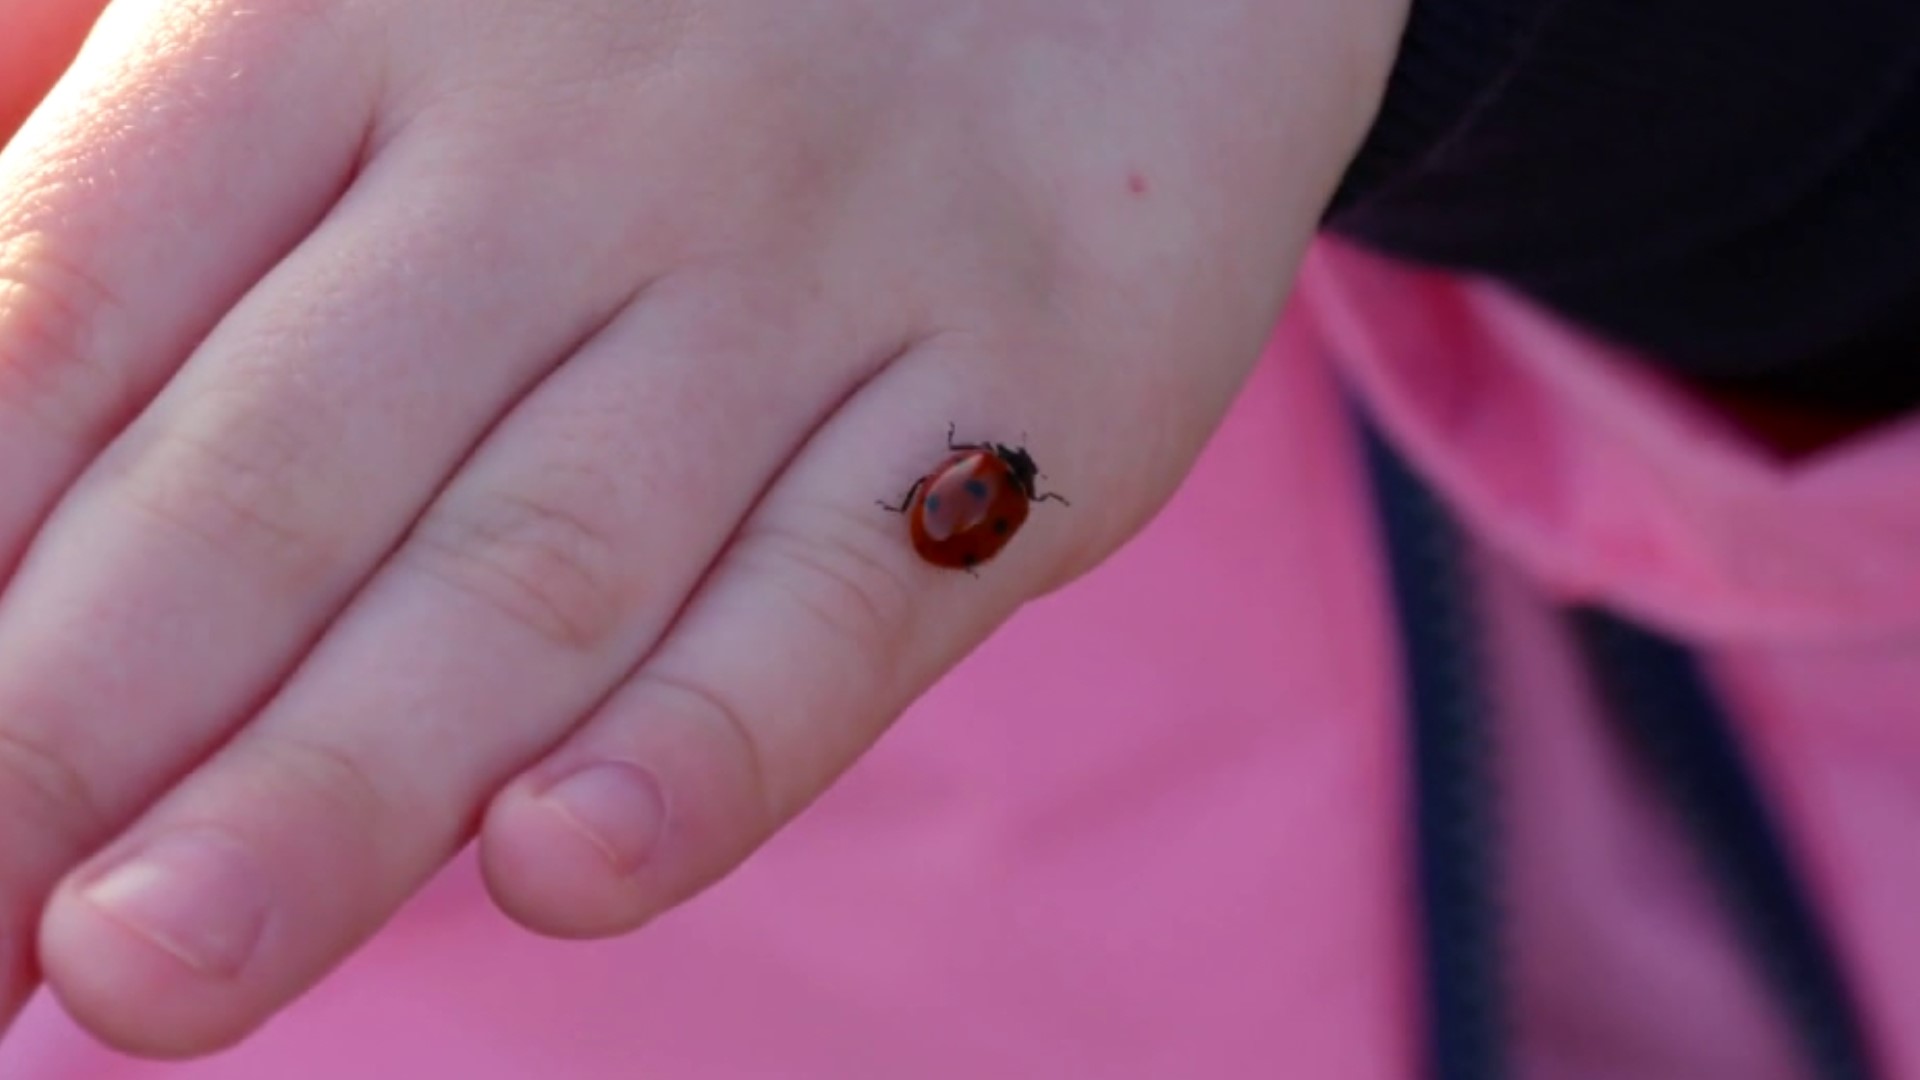 If you've noticed a lot of ladybugs around your house recently, you're not alone. But they're most likely something else.